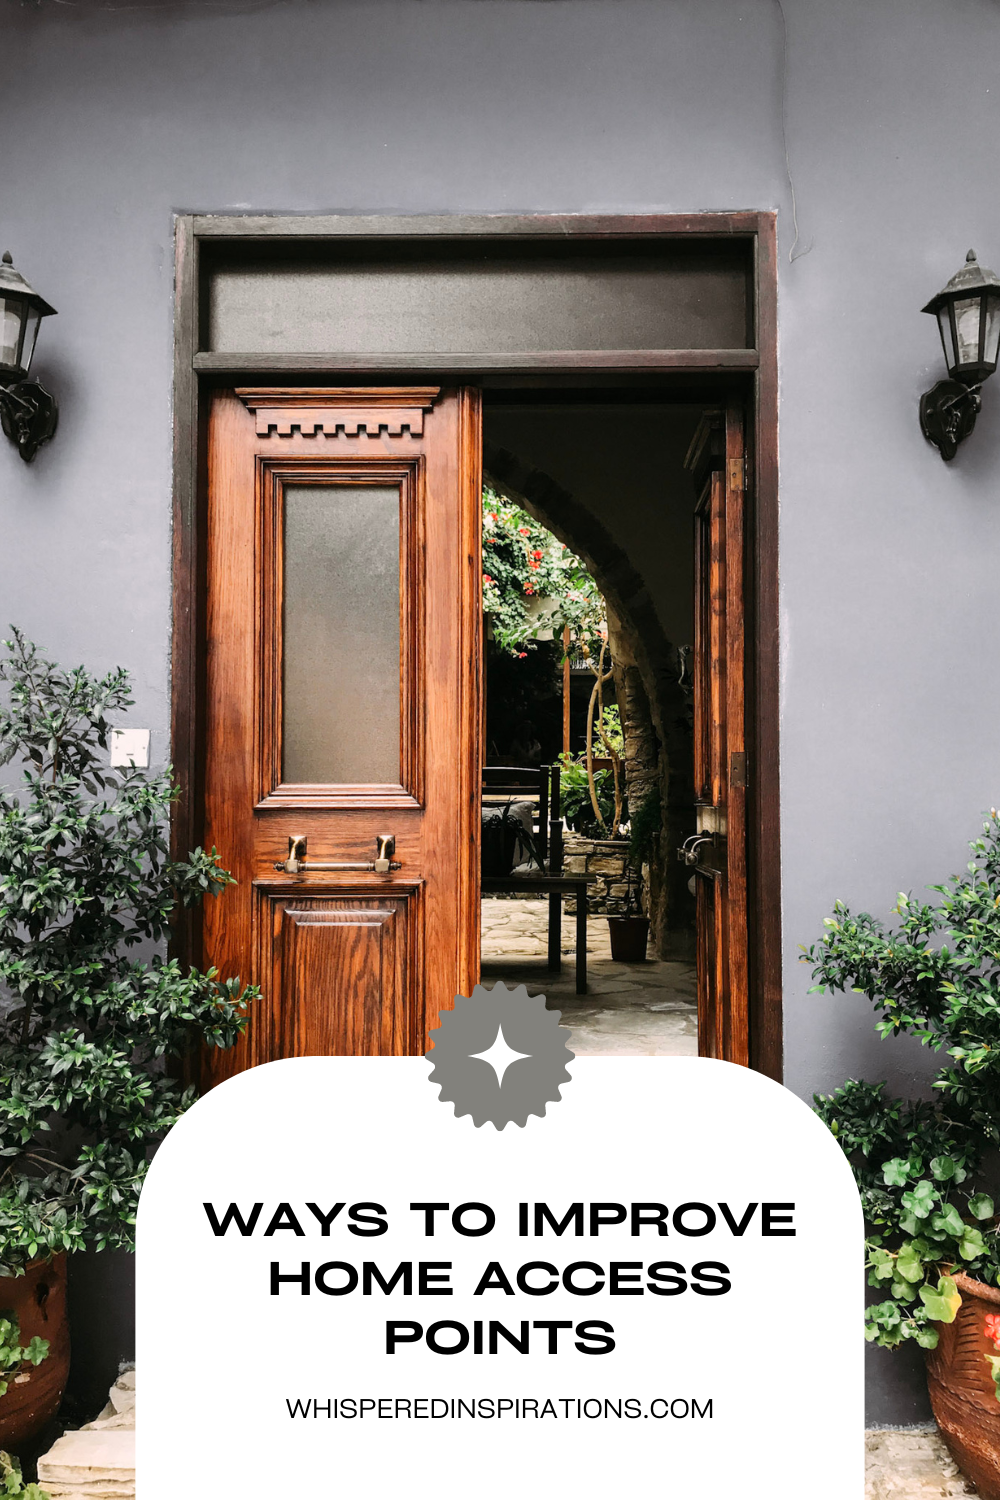 A beautiful grey home with a gorgeous wooden door is shown. It leads to a terrace. This article covers ways to improve home access points.